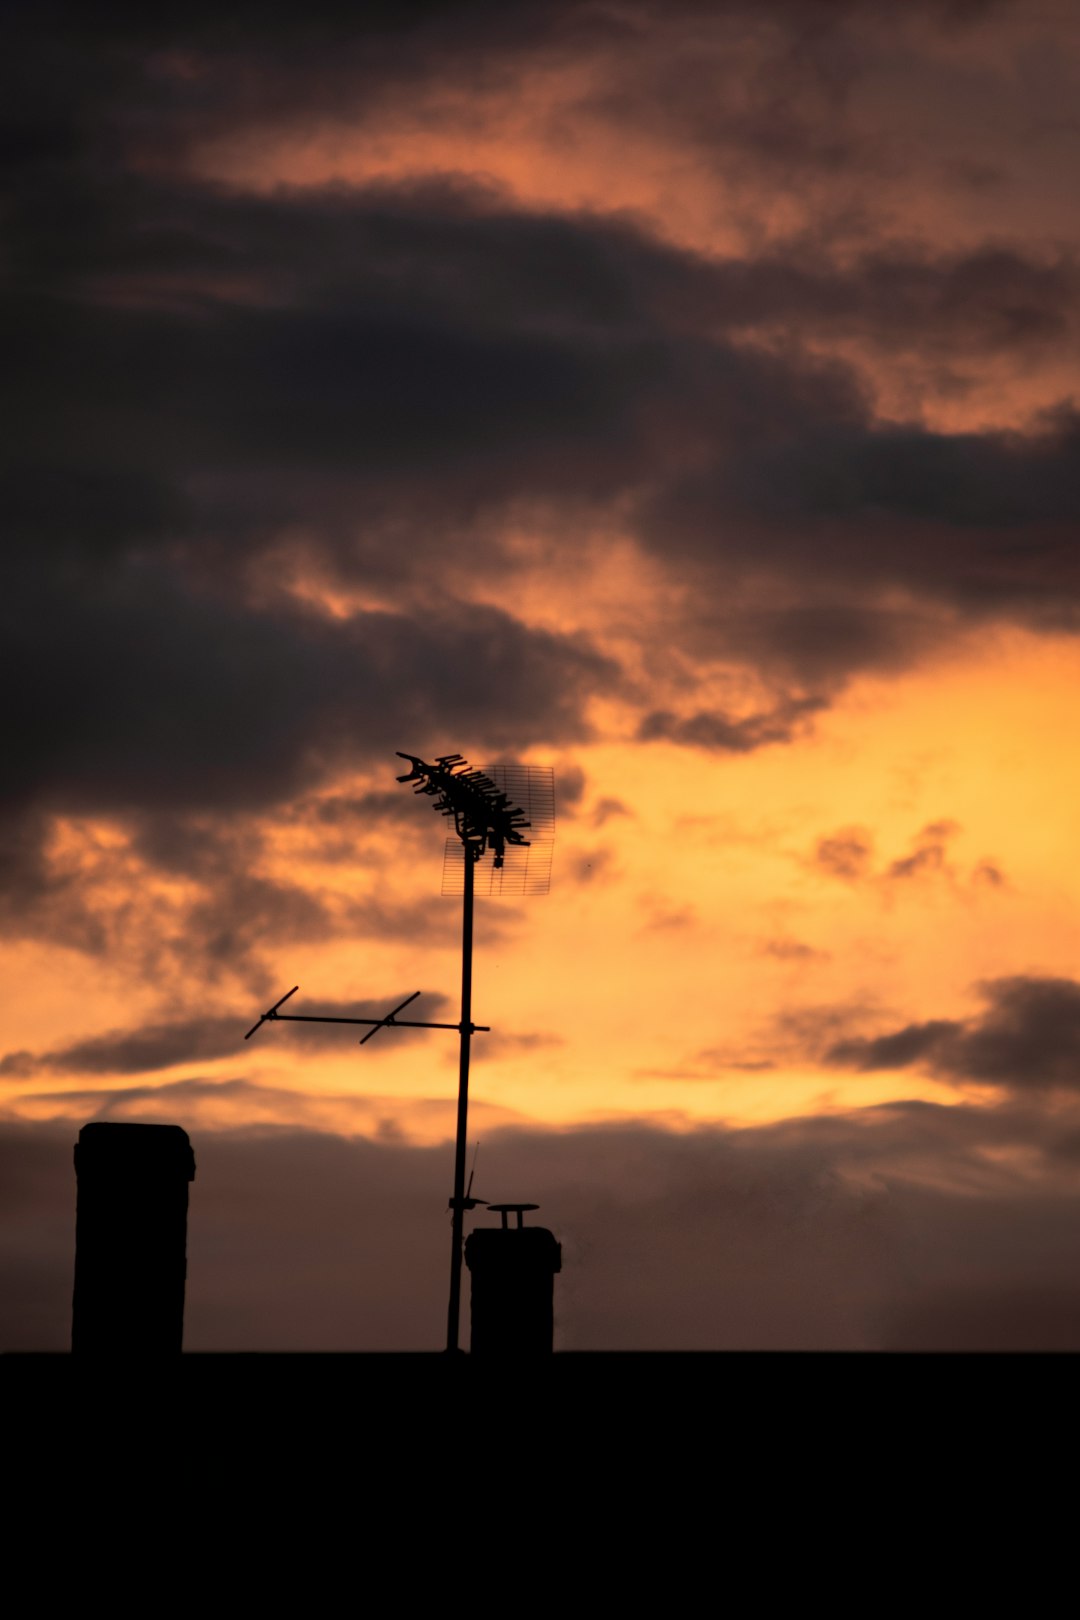 silhouette of wind turbines during sunset